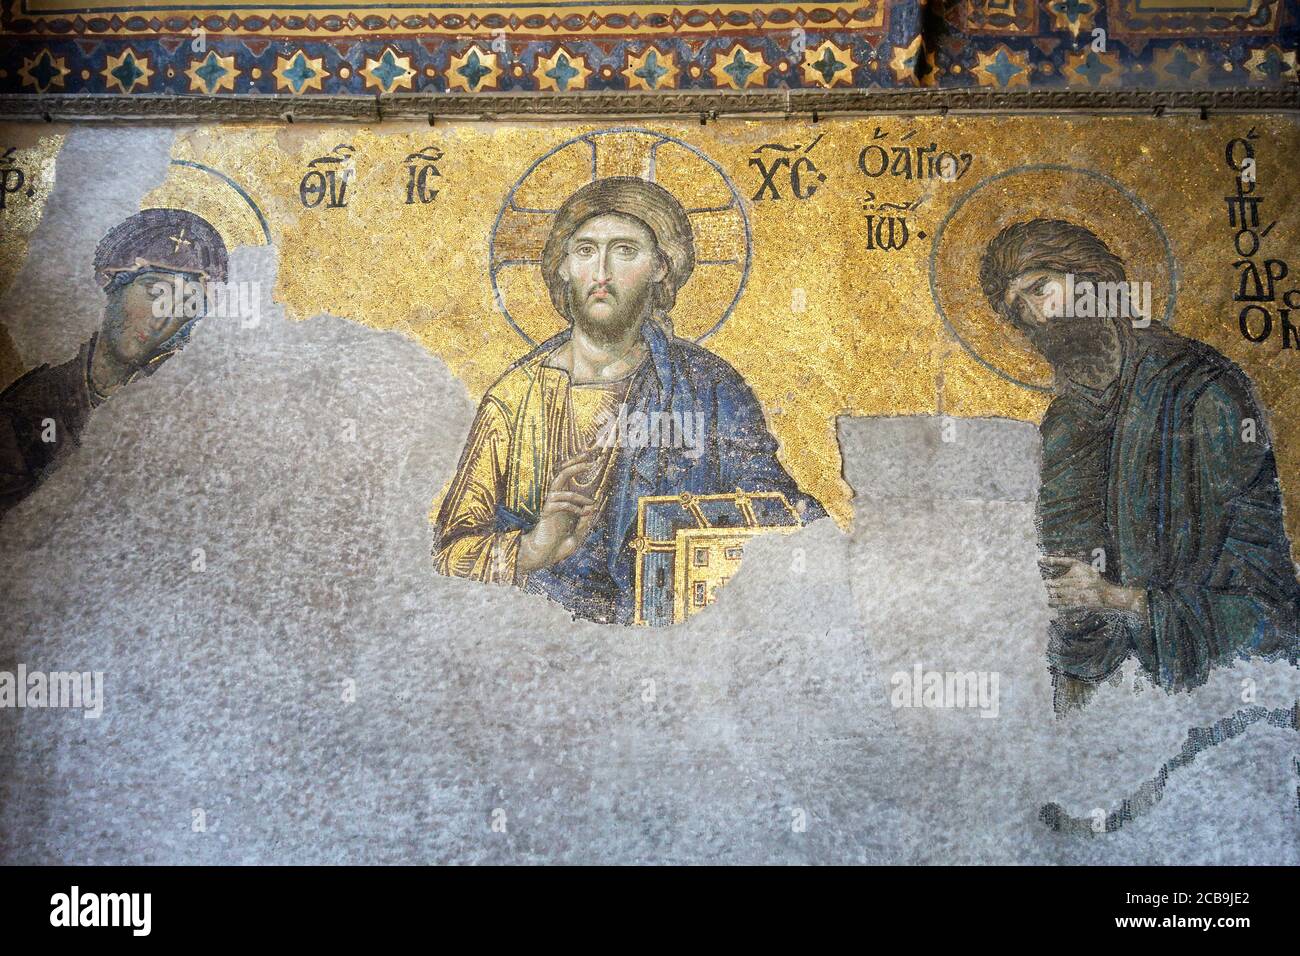 The Deësis mosaic, ancient Christian art showing Christ, Virgin Mary and John the Baptist, on the upper gallery inside Hagia Sophia. Istanbul. Turkey. Stock Photo